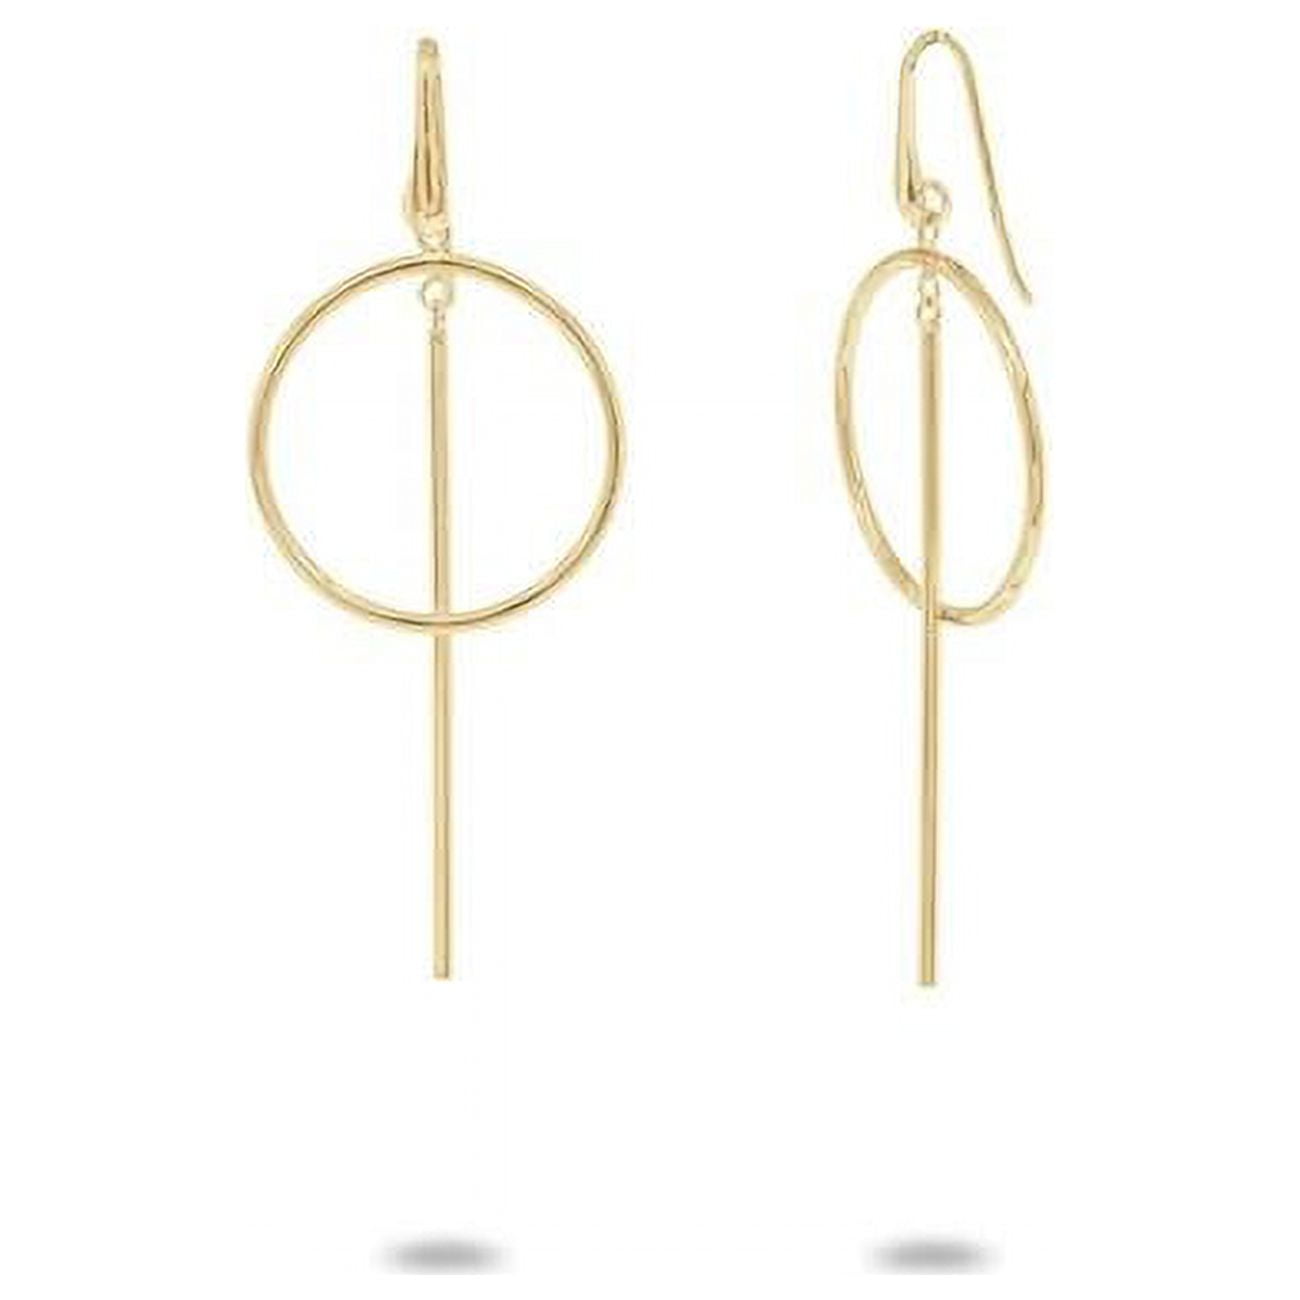 Picture of Fronay 325135G Golden Geometric Circle Earrings with Dangling Bar